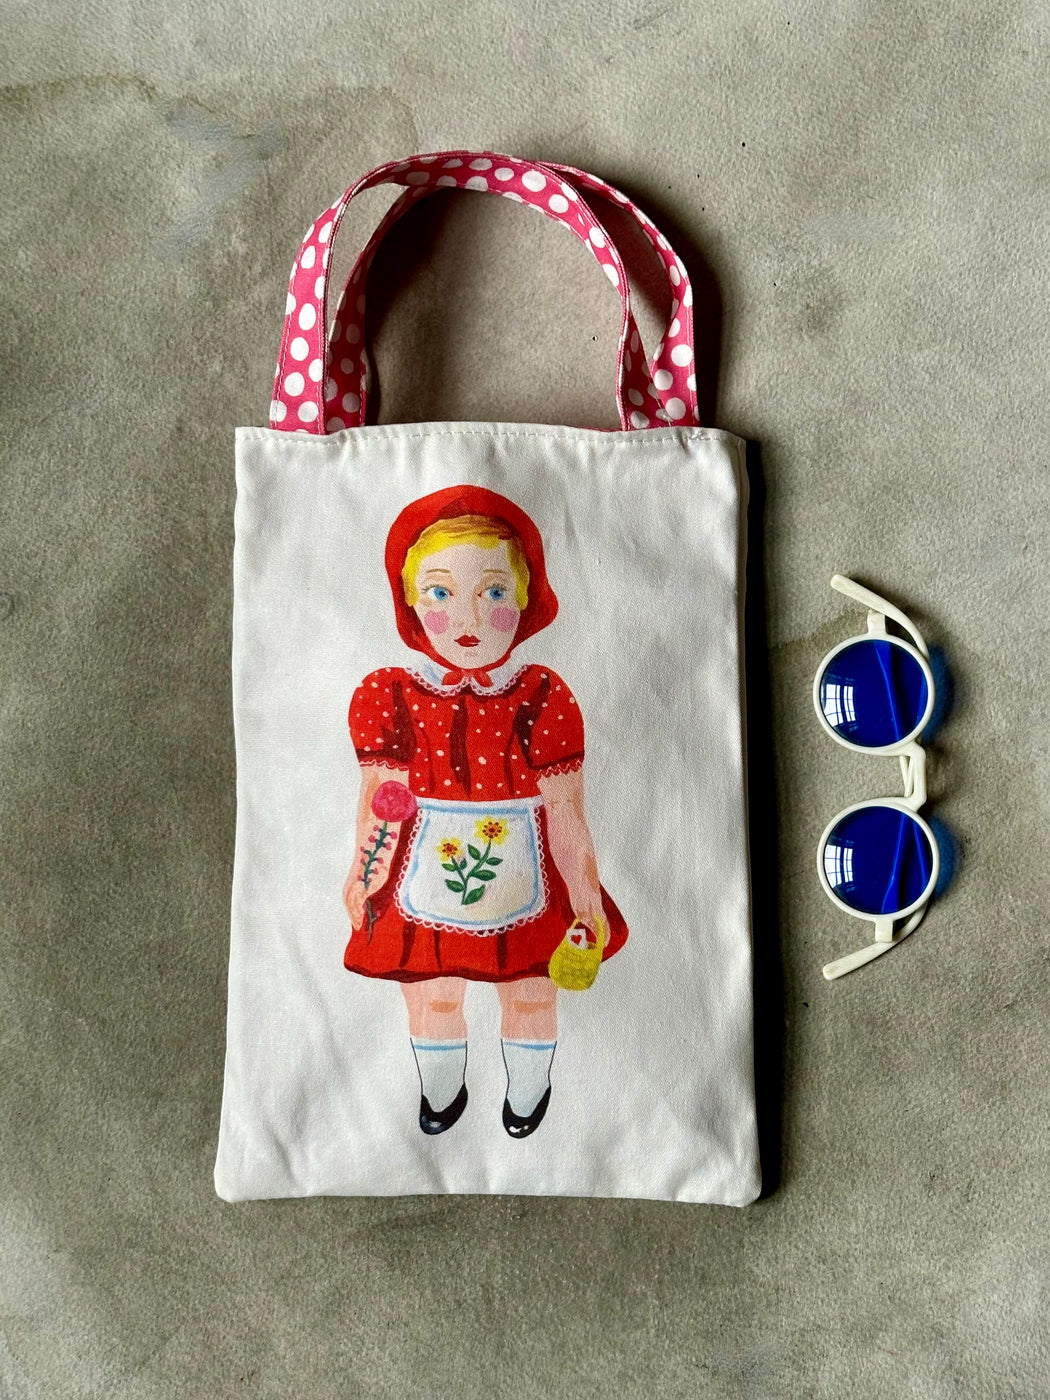 Nathalie Lete "Little Red Riding Hood" Mini Tote